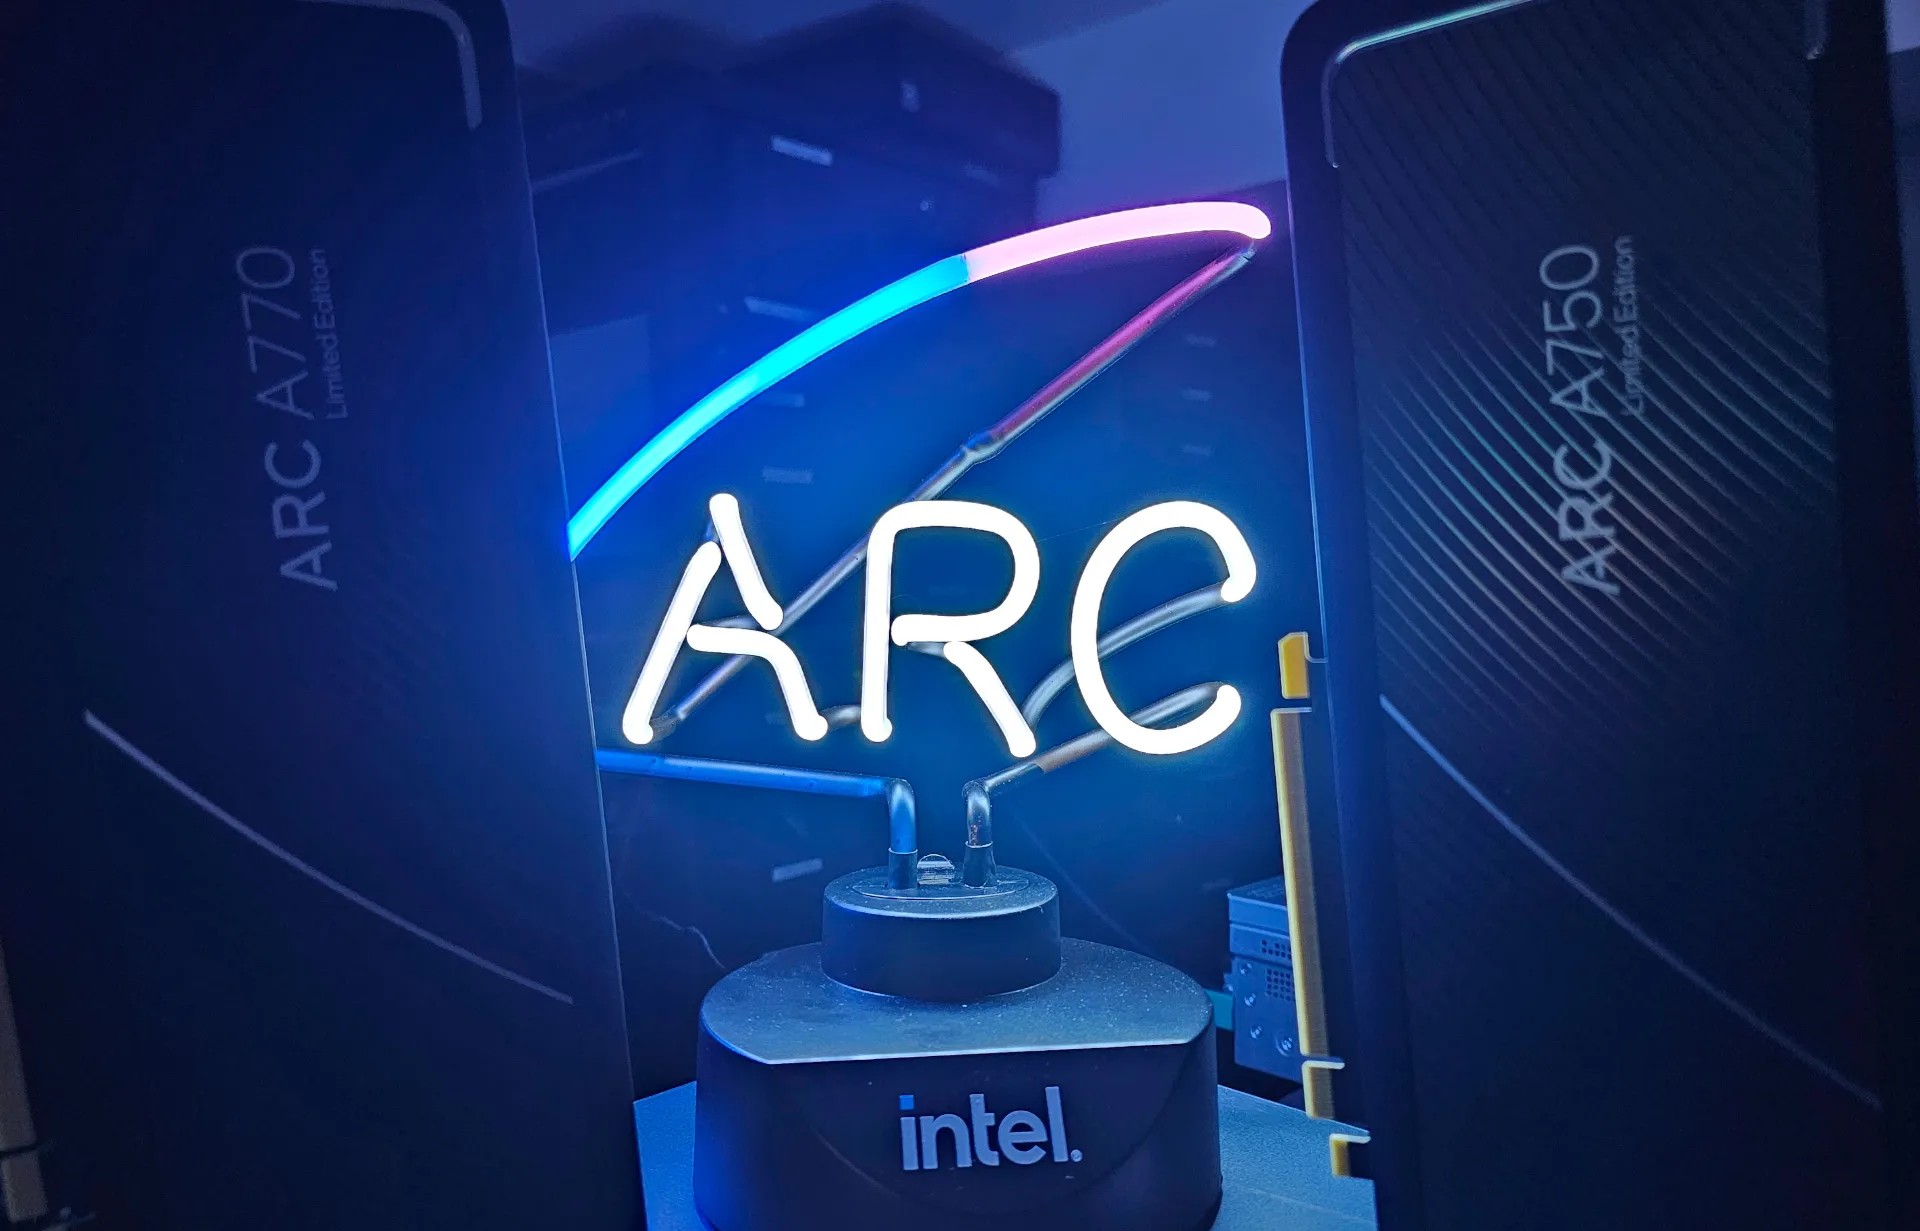 Intel Compute Runtime 24.13.29138.7 Brings Improved OpenCL/OpenGL Sharing